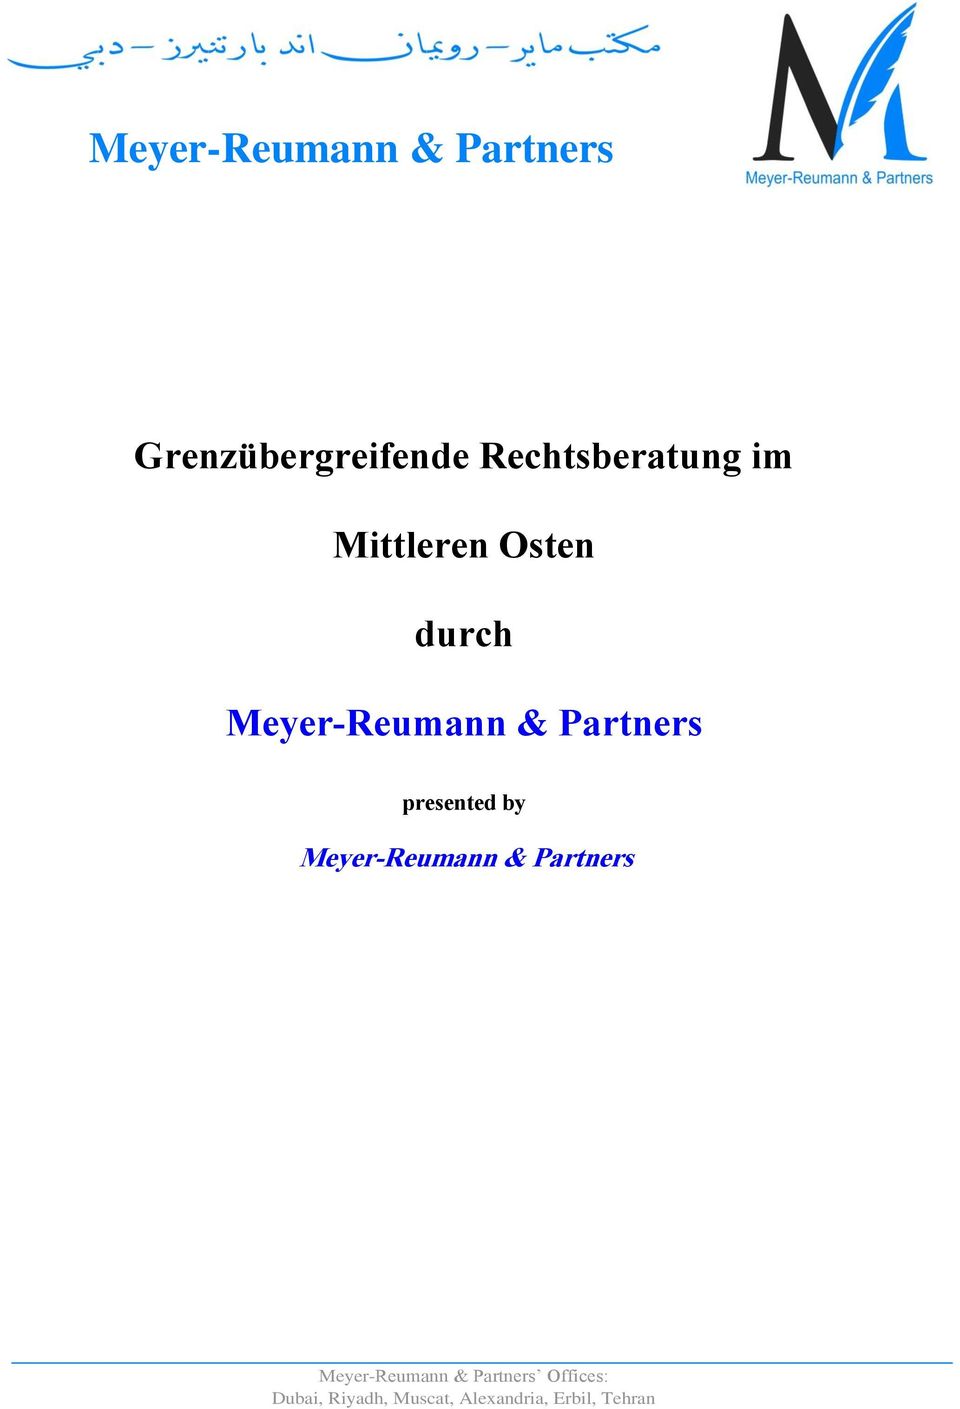 Partners presented by Meyer-Reumann & Partners